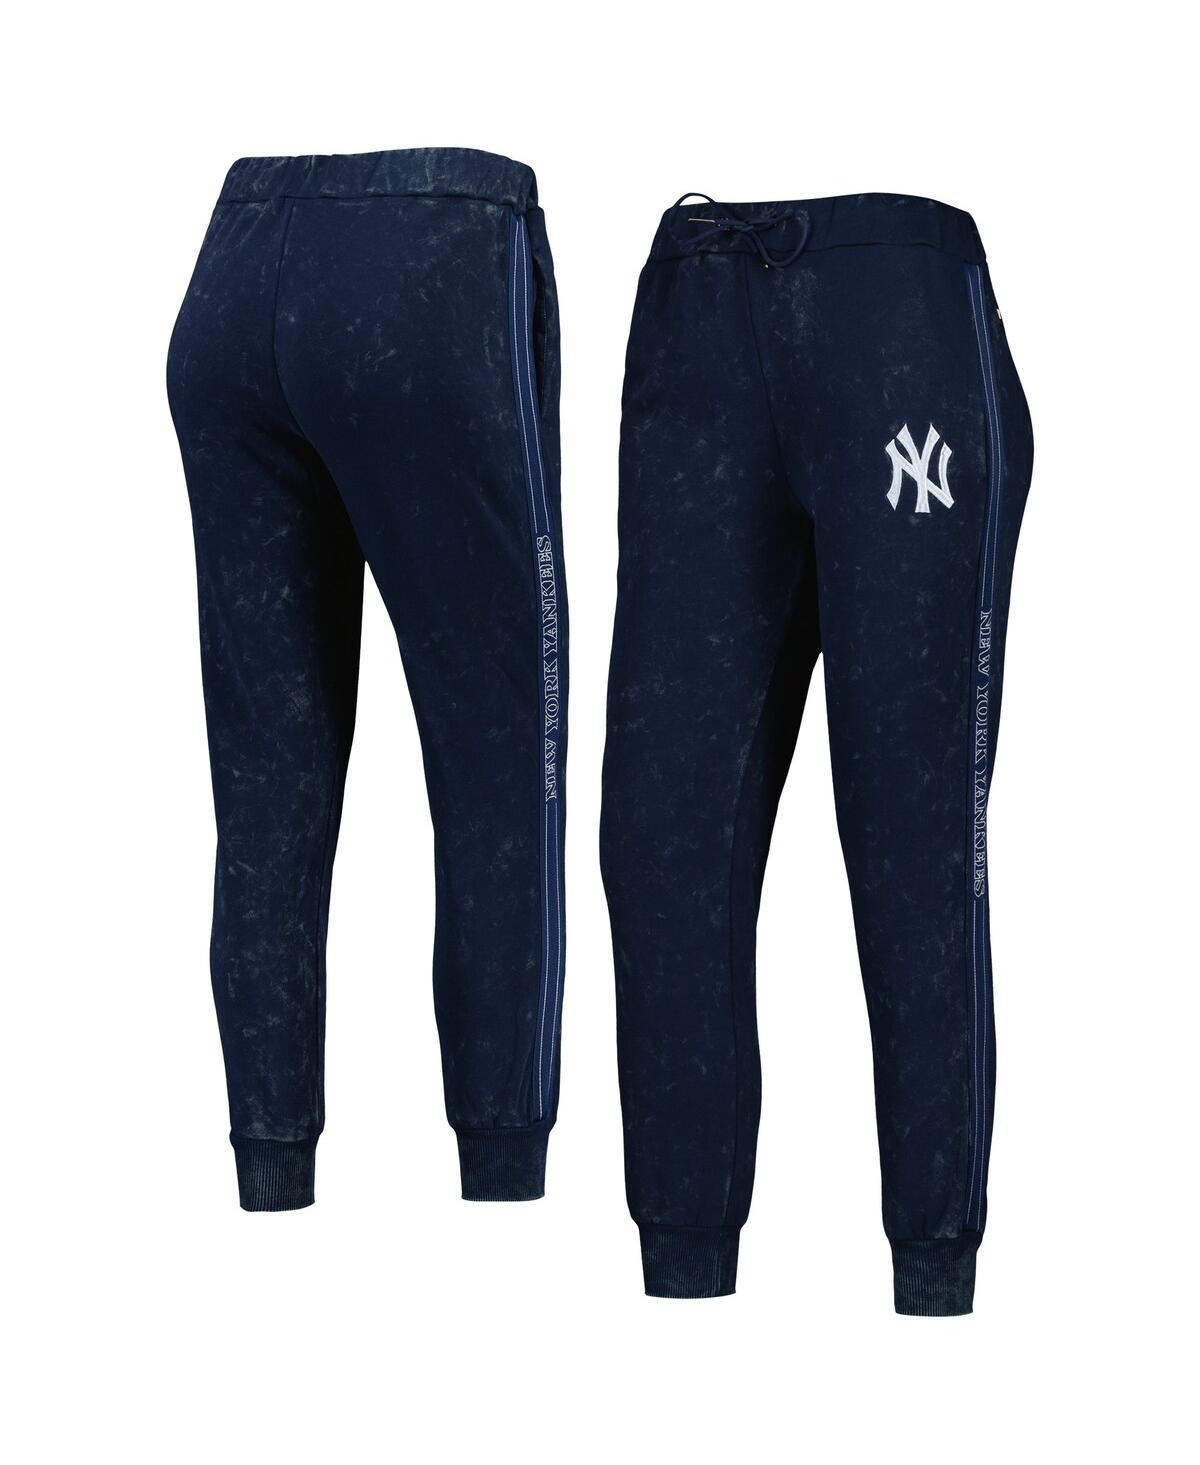 Shop The Wild Collective Women's  Navy New York Yankees Marble Jogger Pants